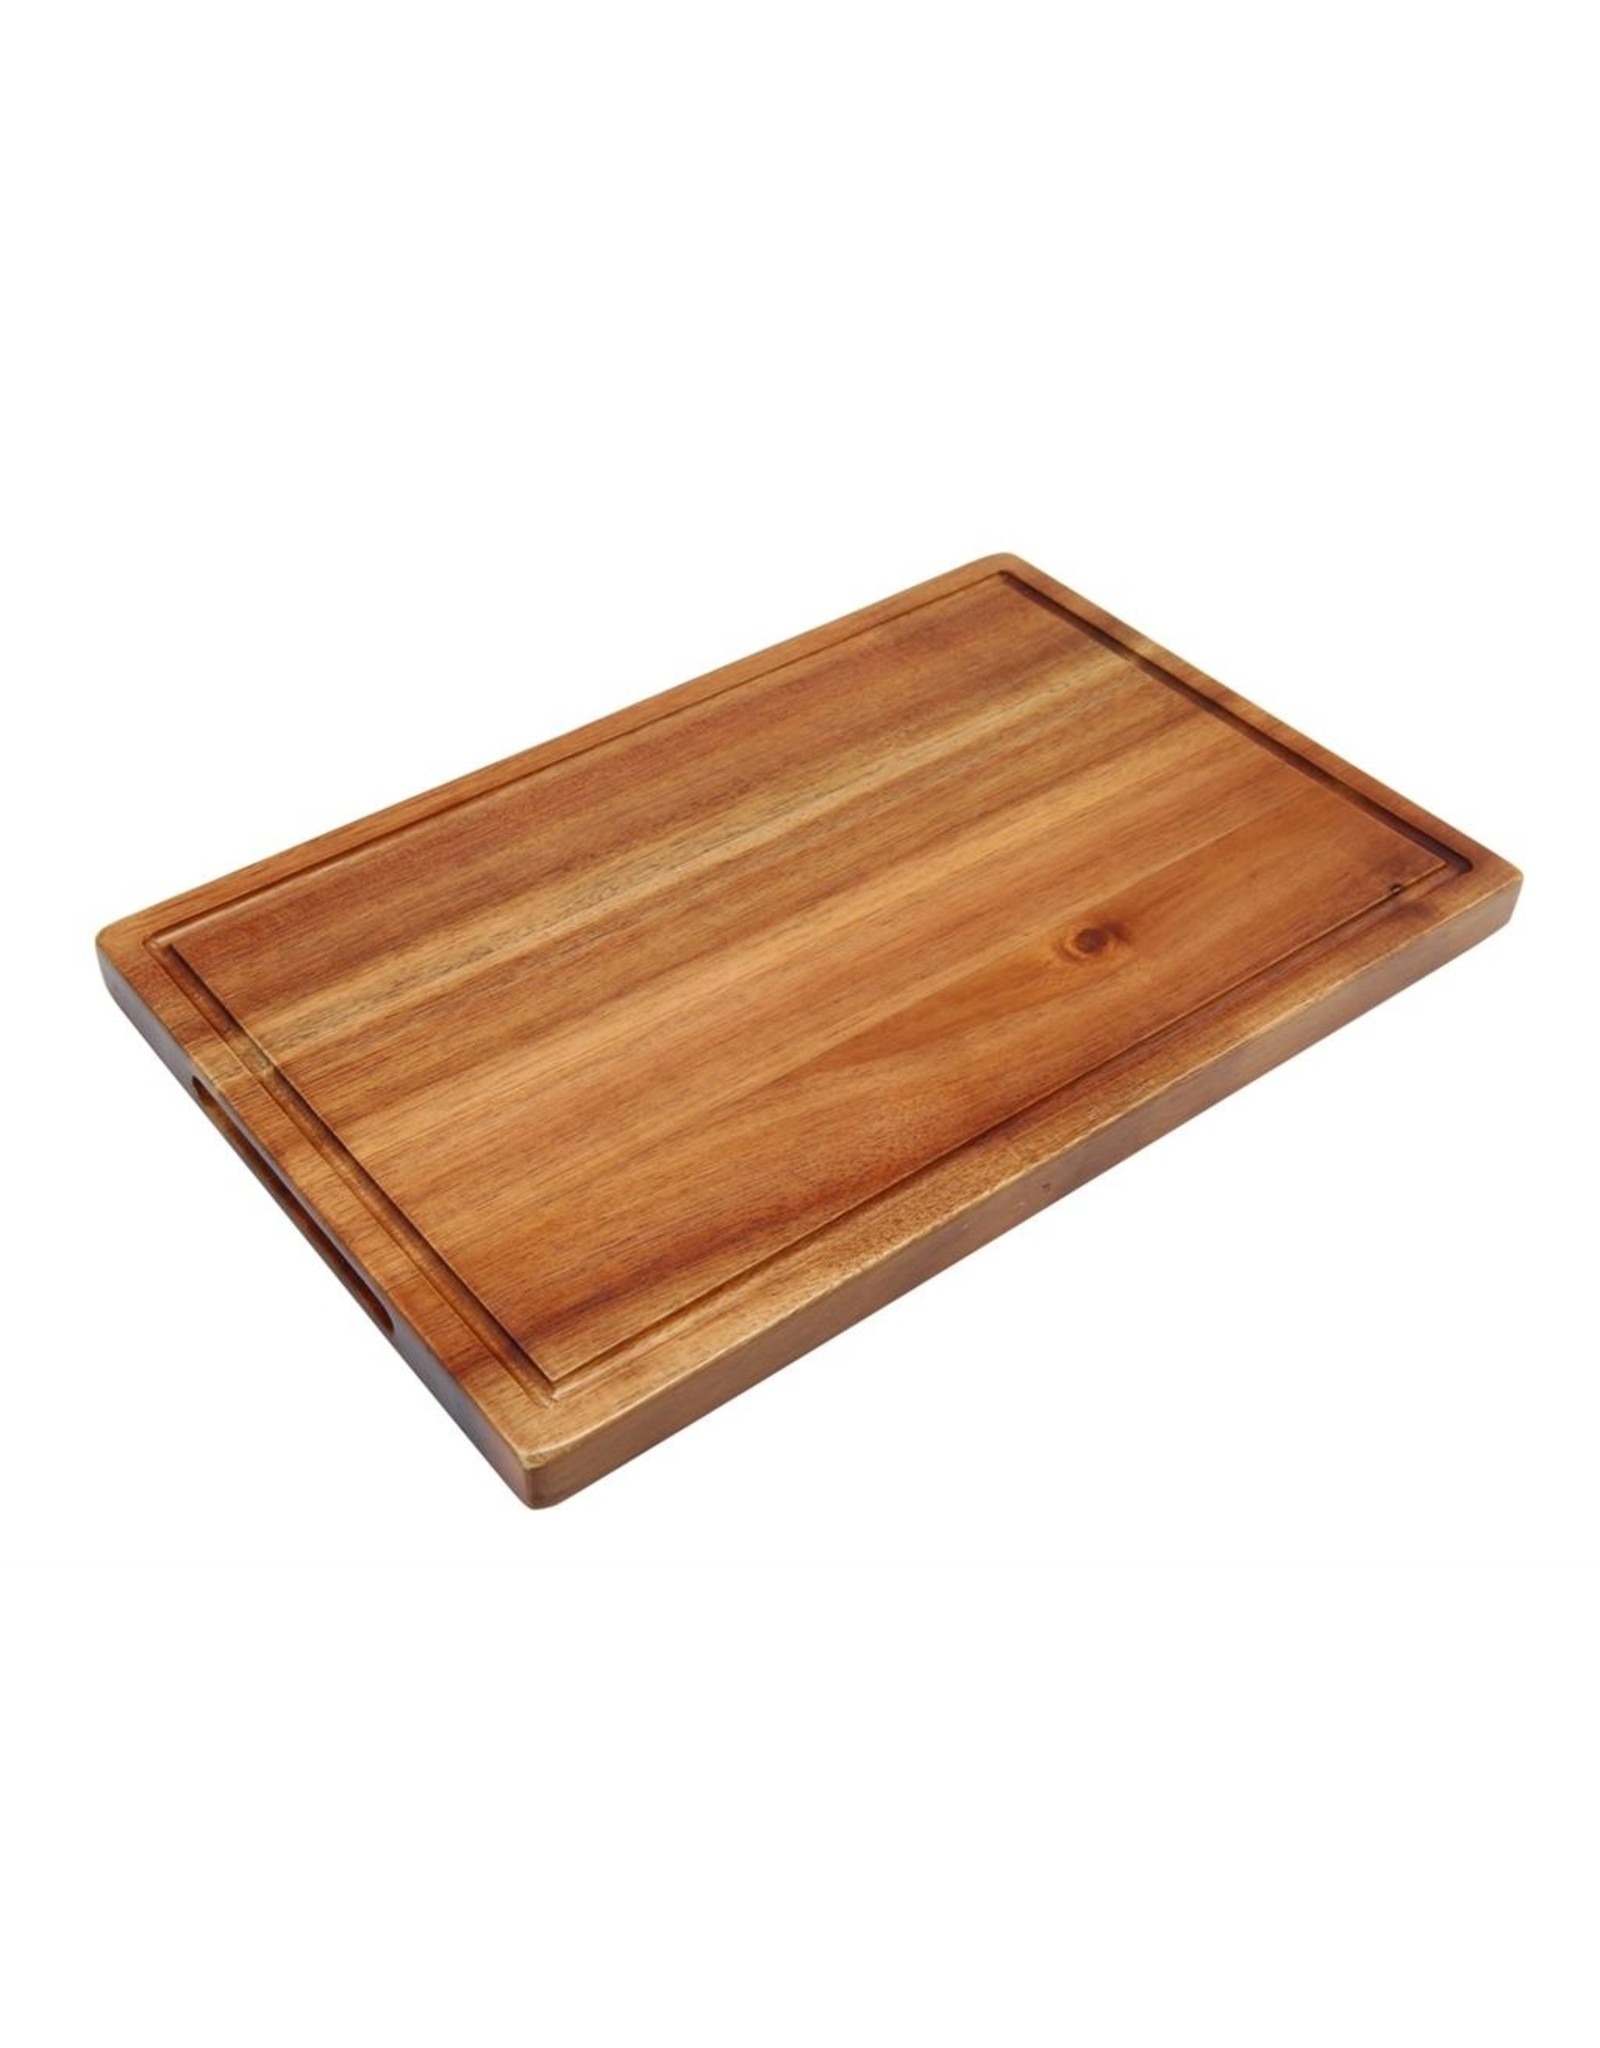 Stylepoint Acacia wood serving board 34 x 22 x 2 cm